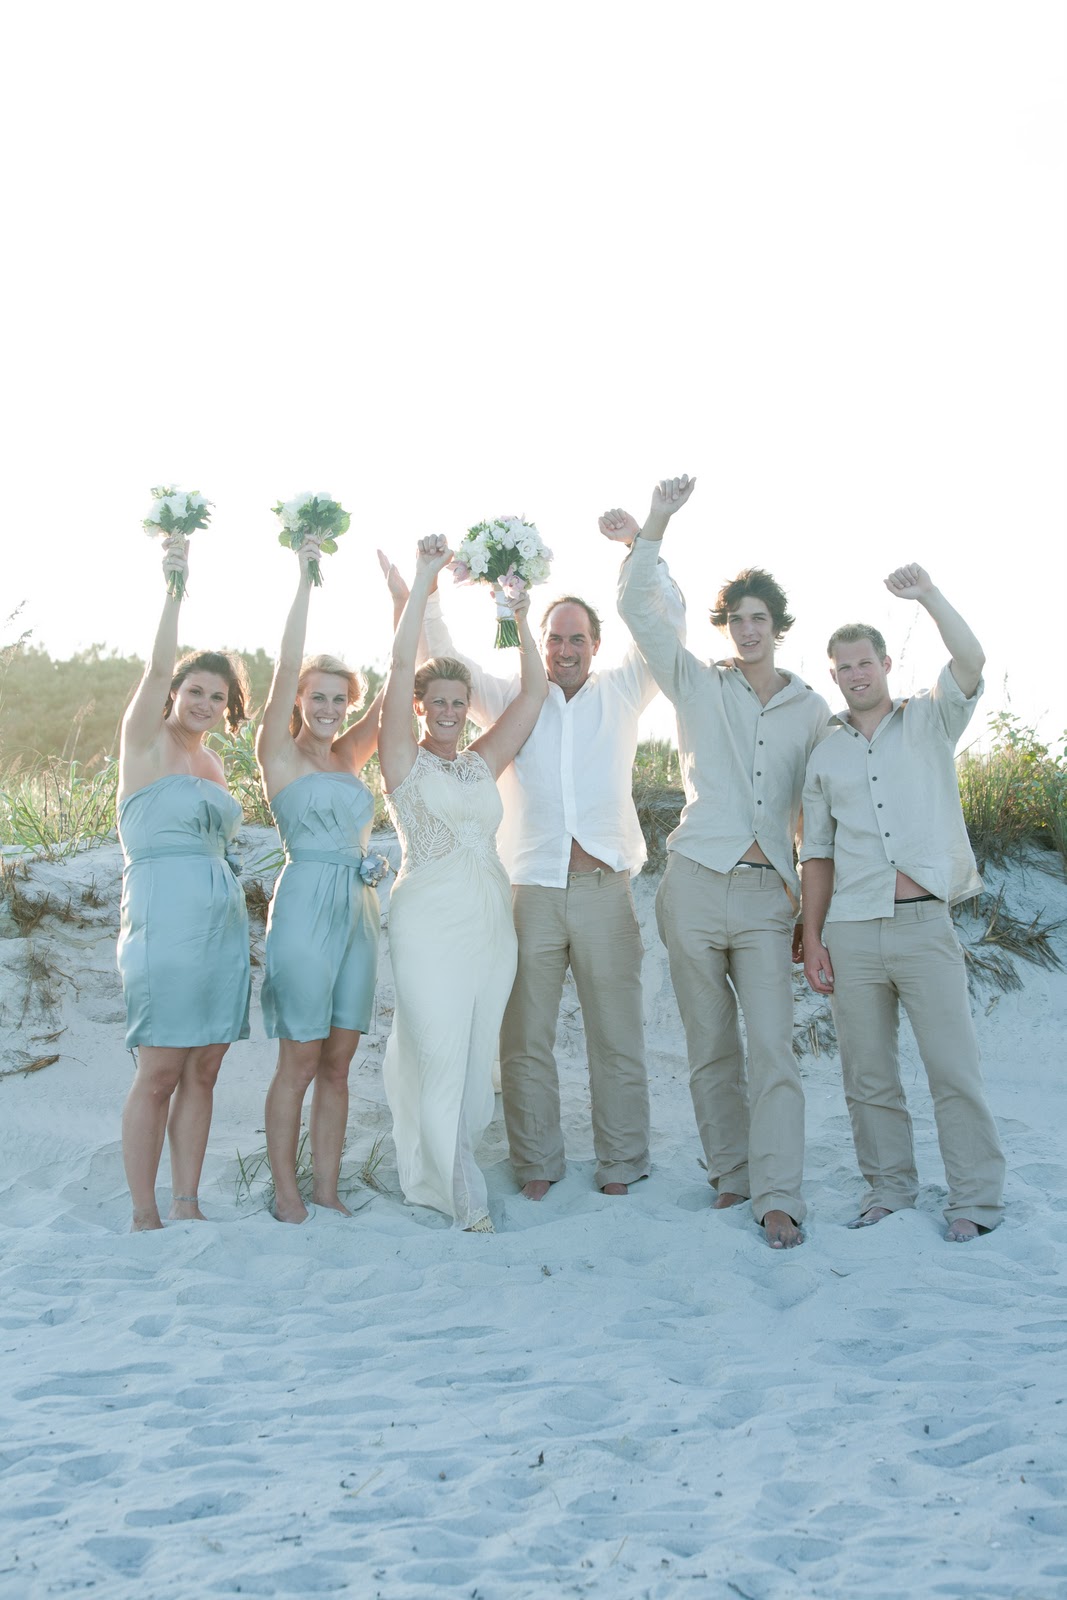 Sincerely yours, : Lana & Dave's Vintage Beach Wedding